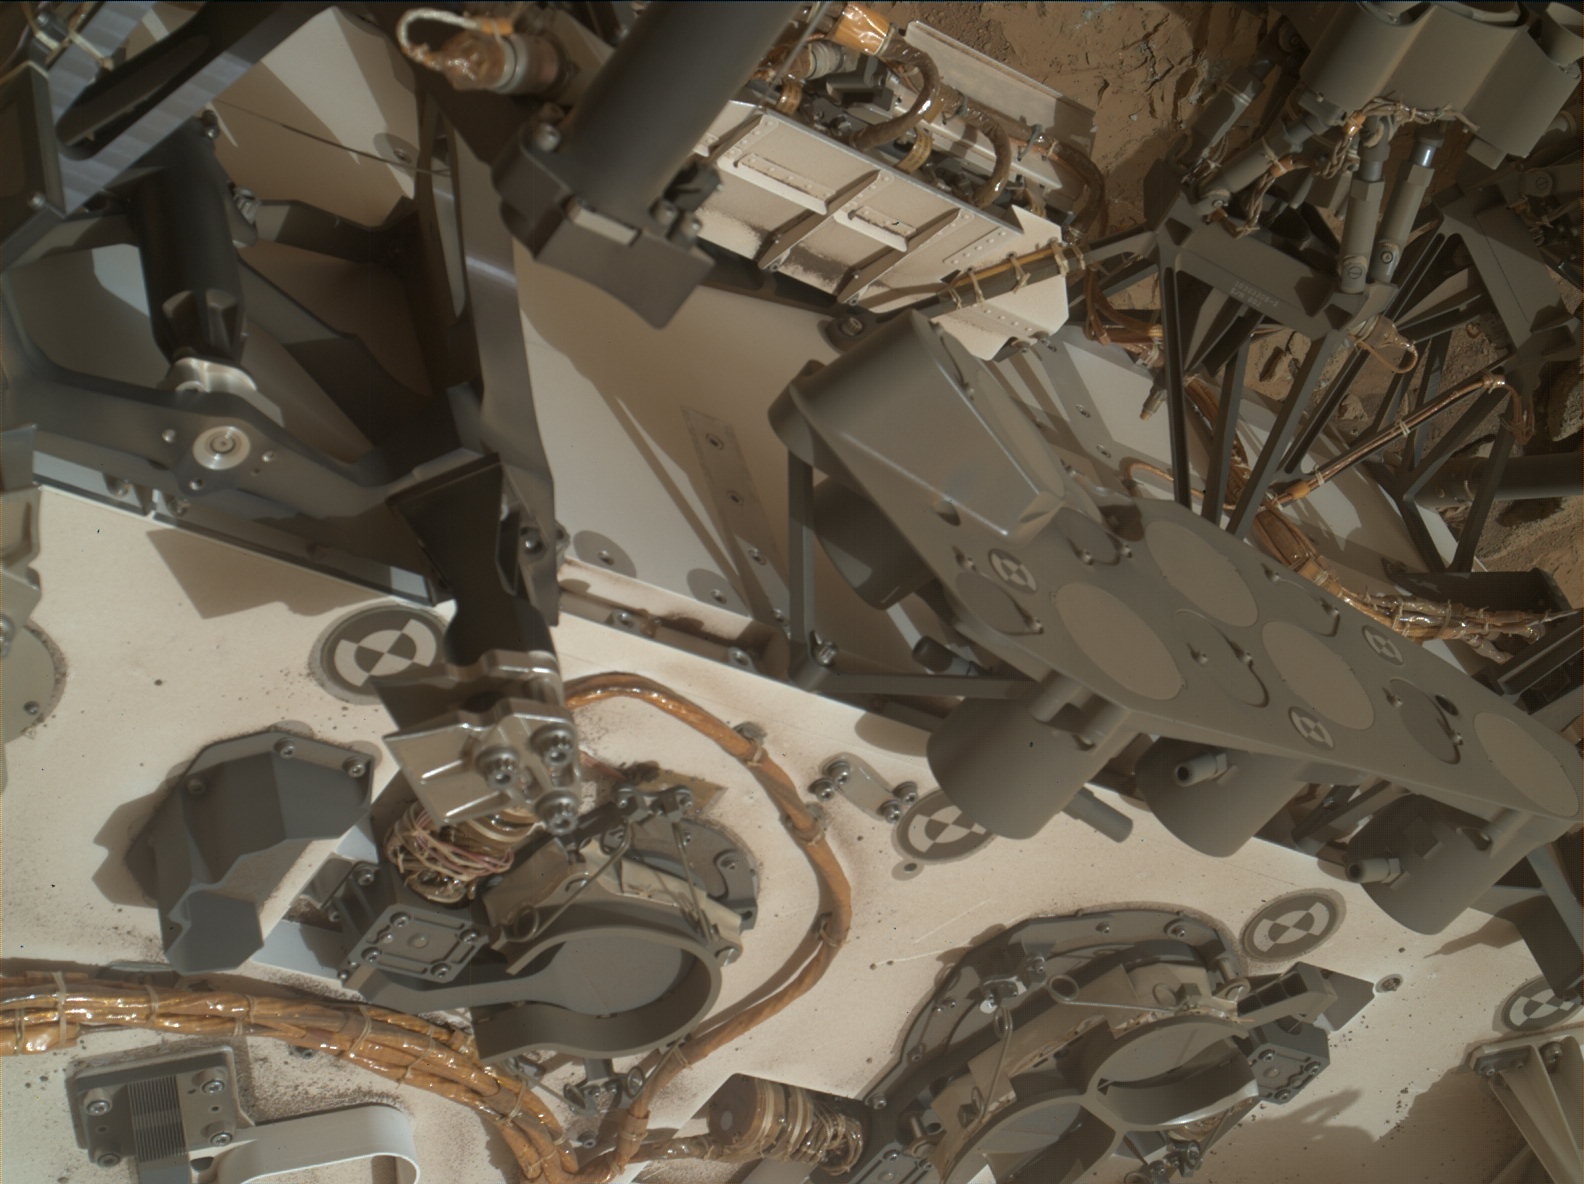 Nasa's Mars rover Curiosity acquired this image using its Mars Hand Lens Imager (MAHLI) on Sol 177